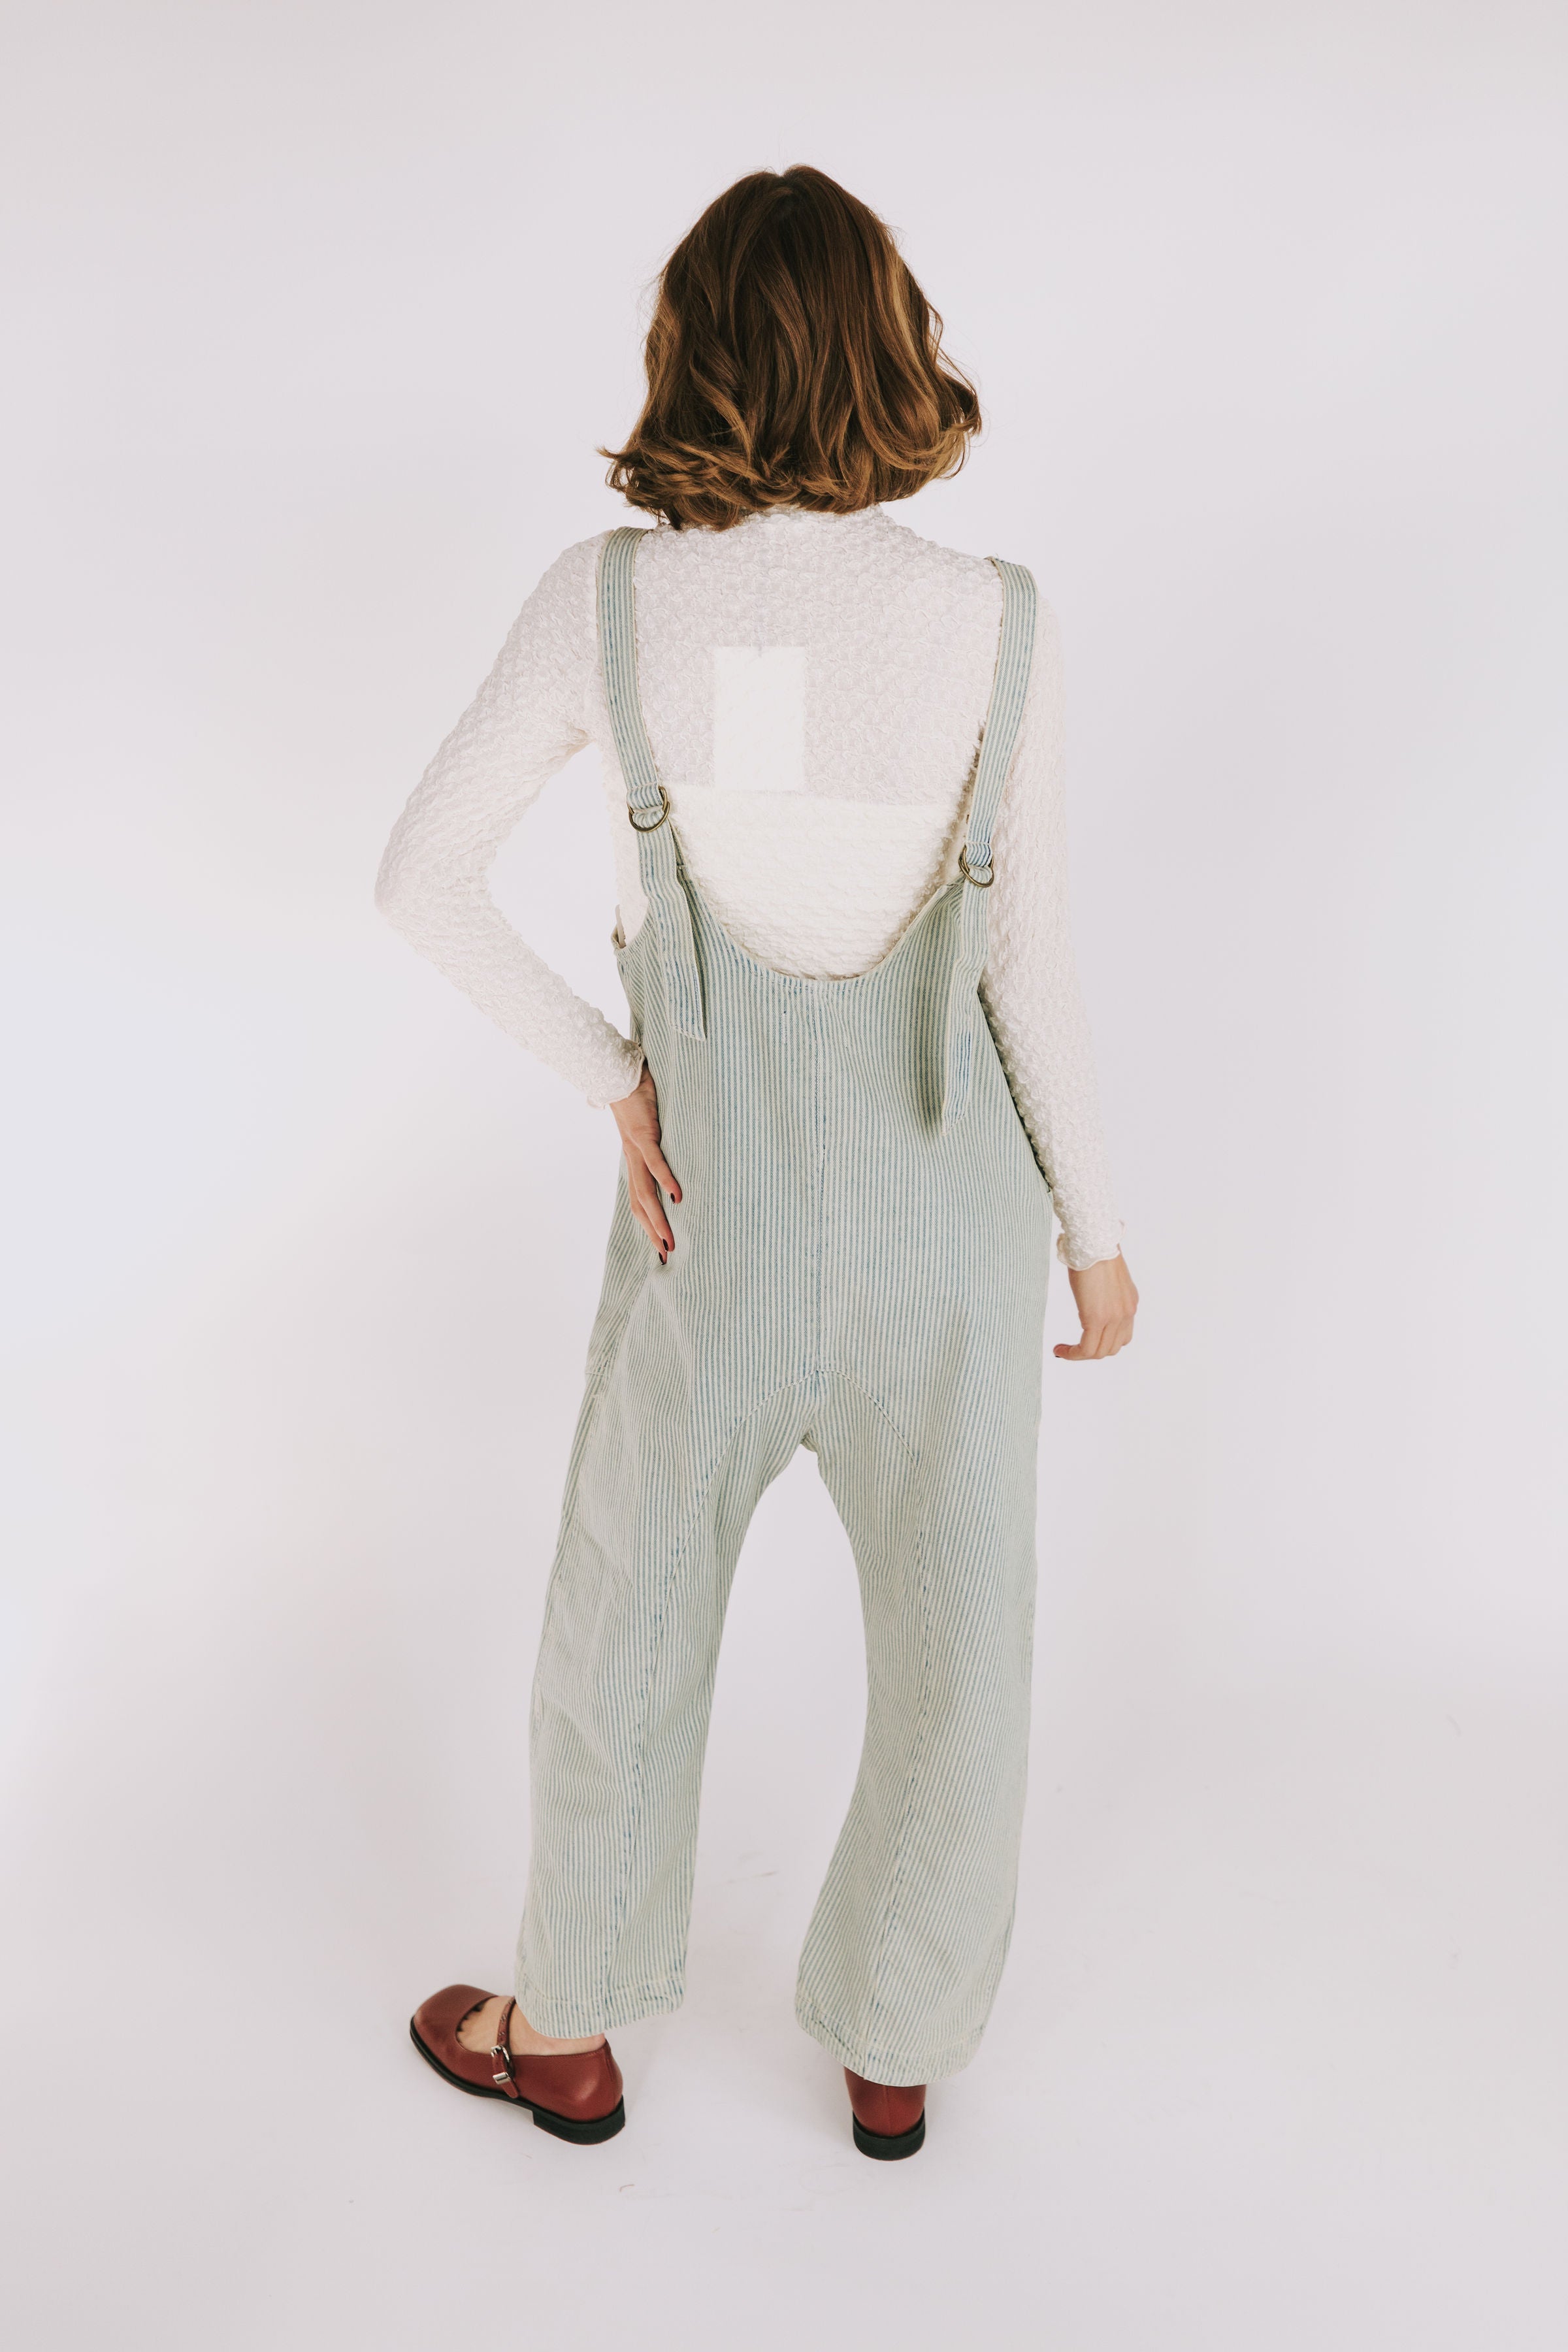 FREE PEOPLE - High Roller Railroad Jumpsuit